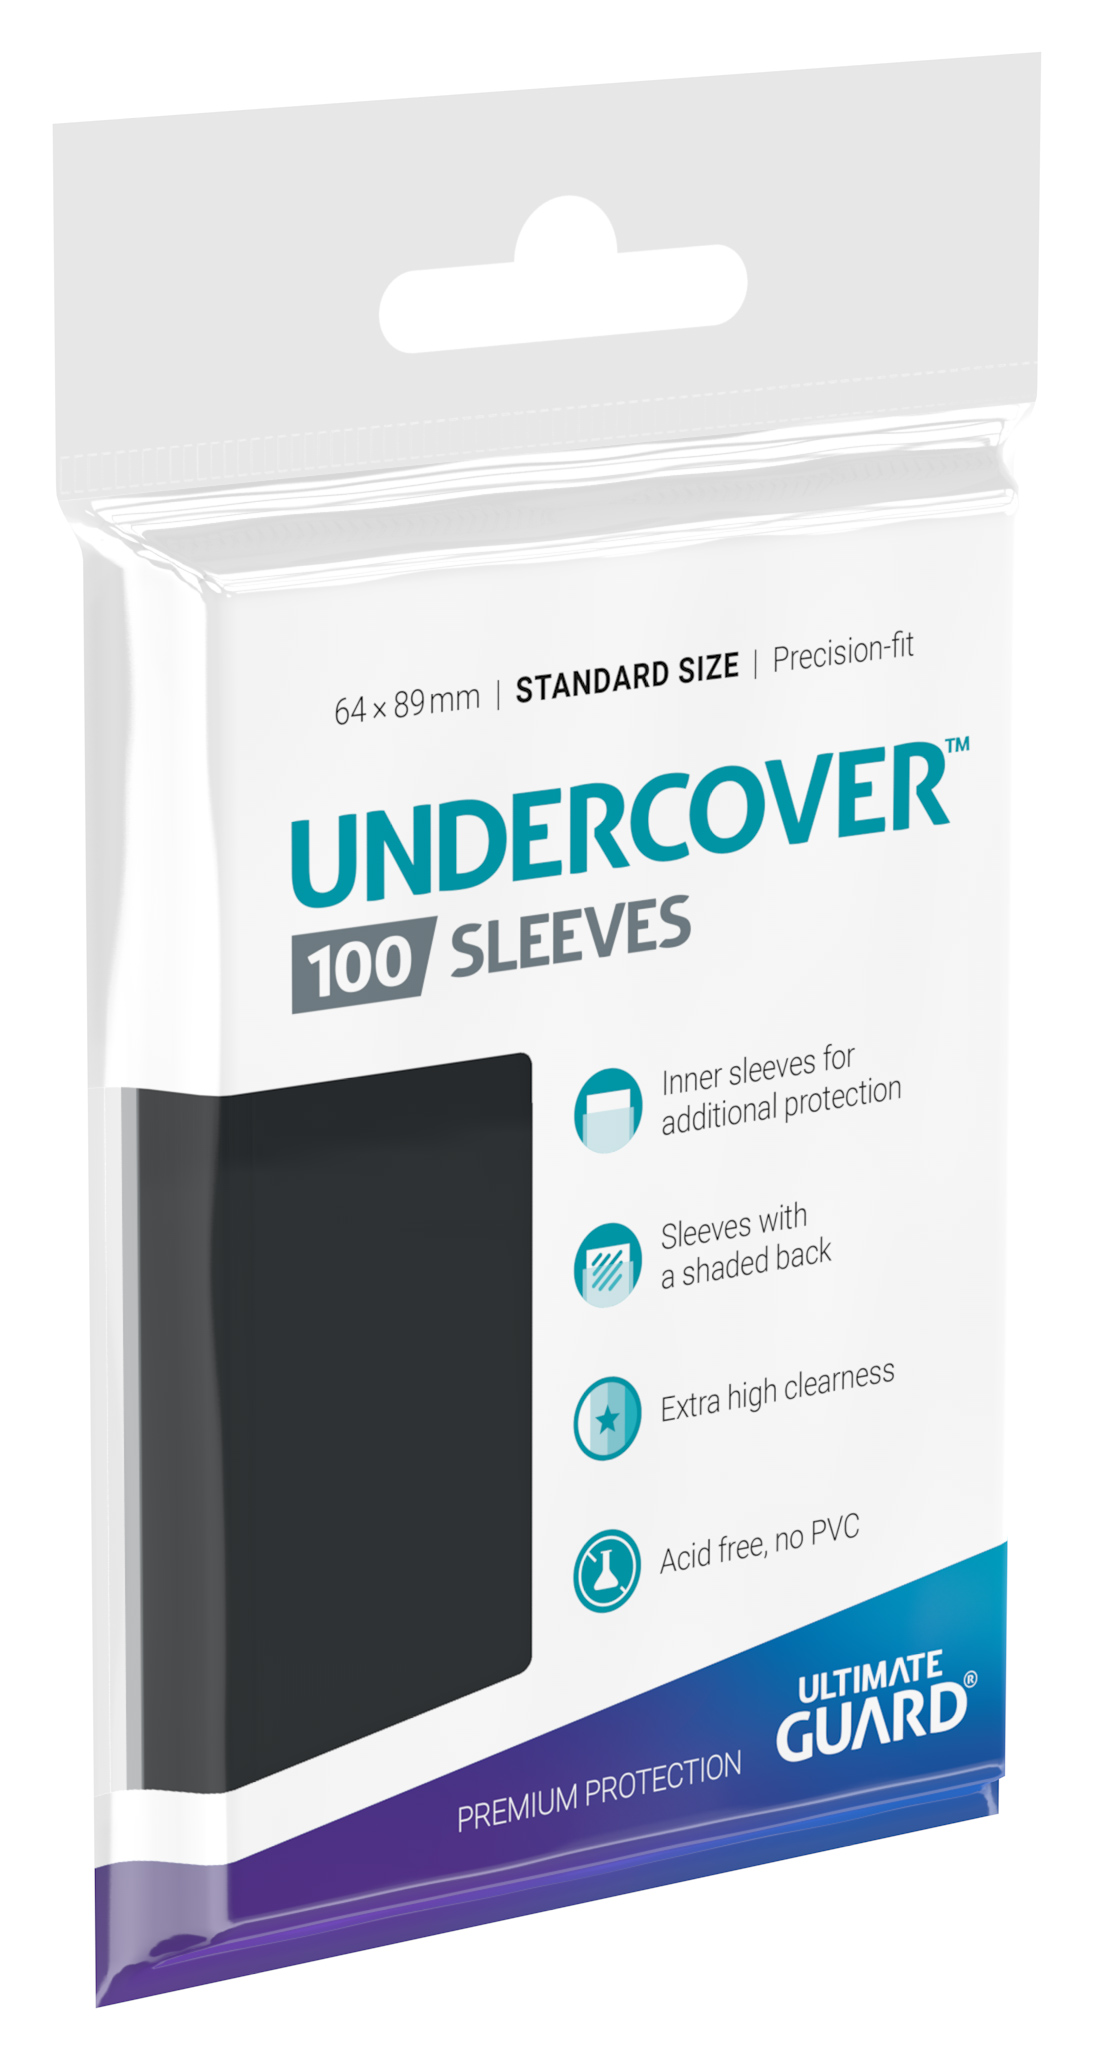 Undercover Sleeves